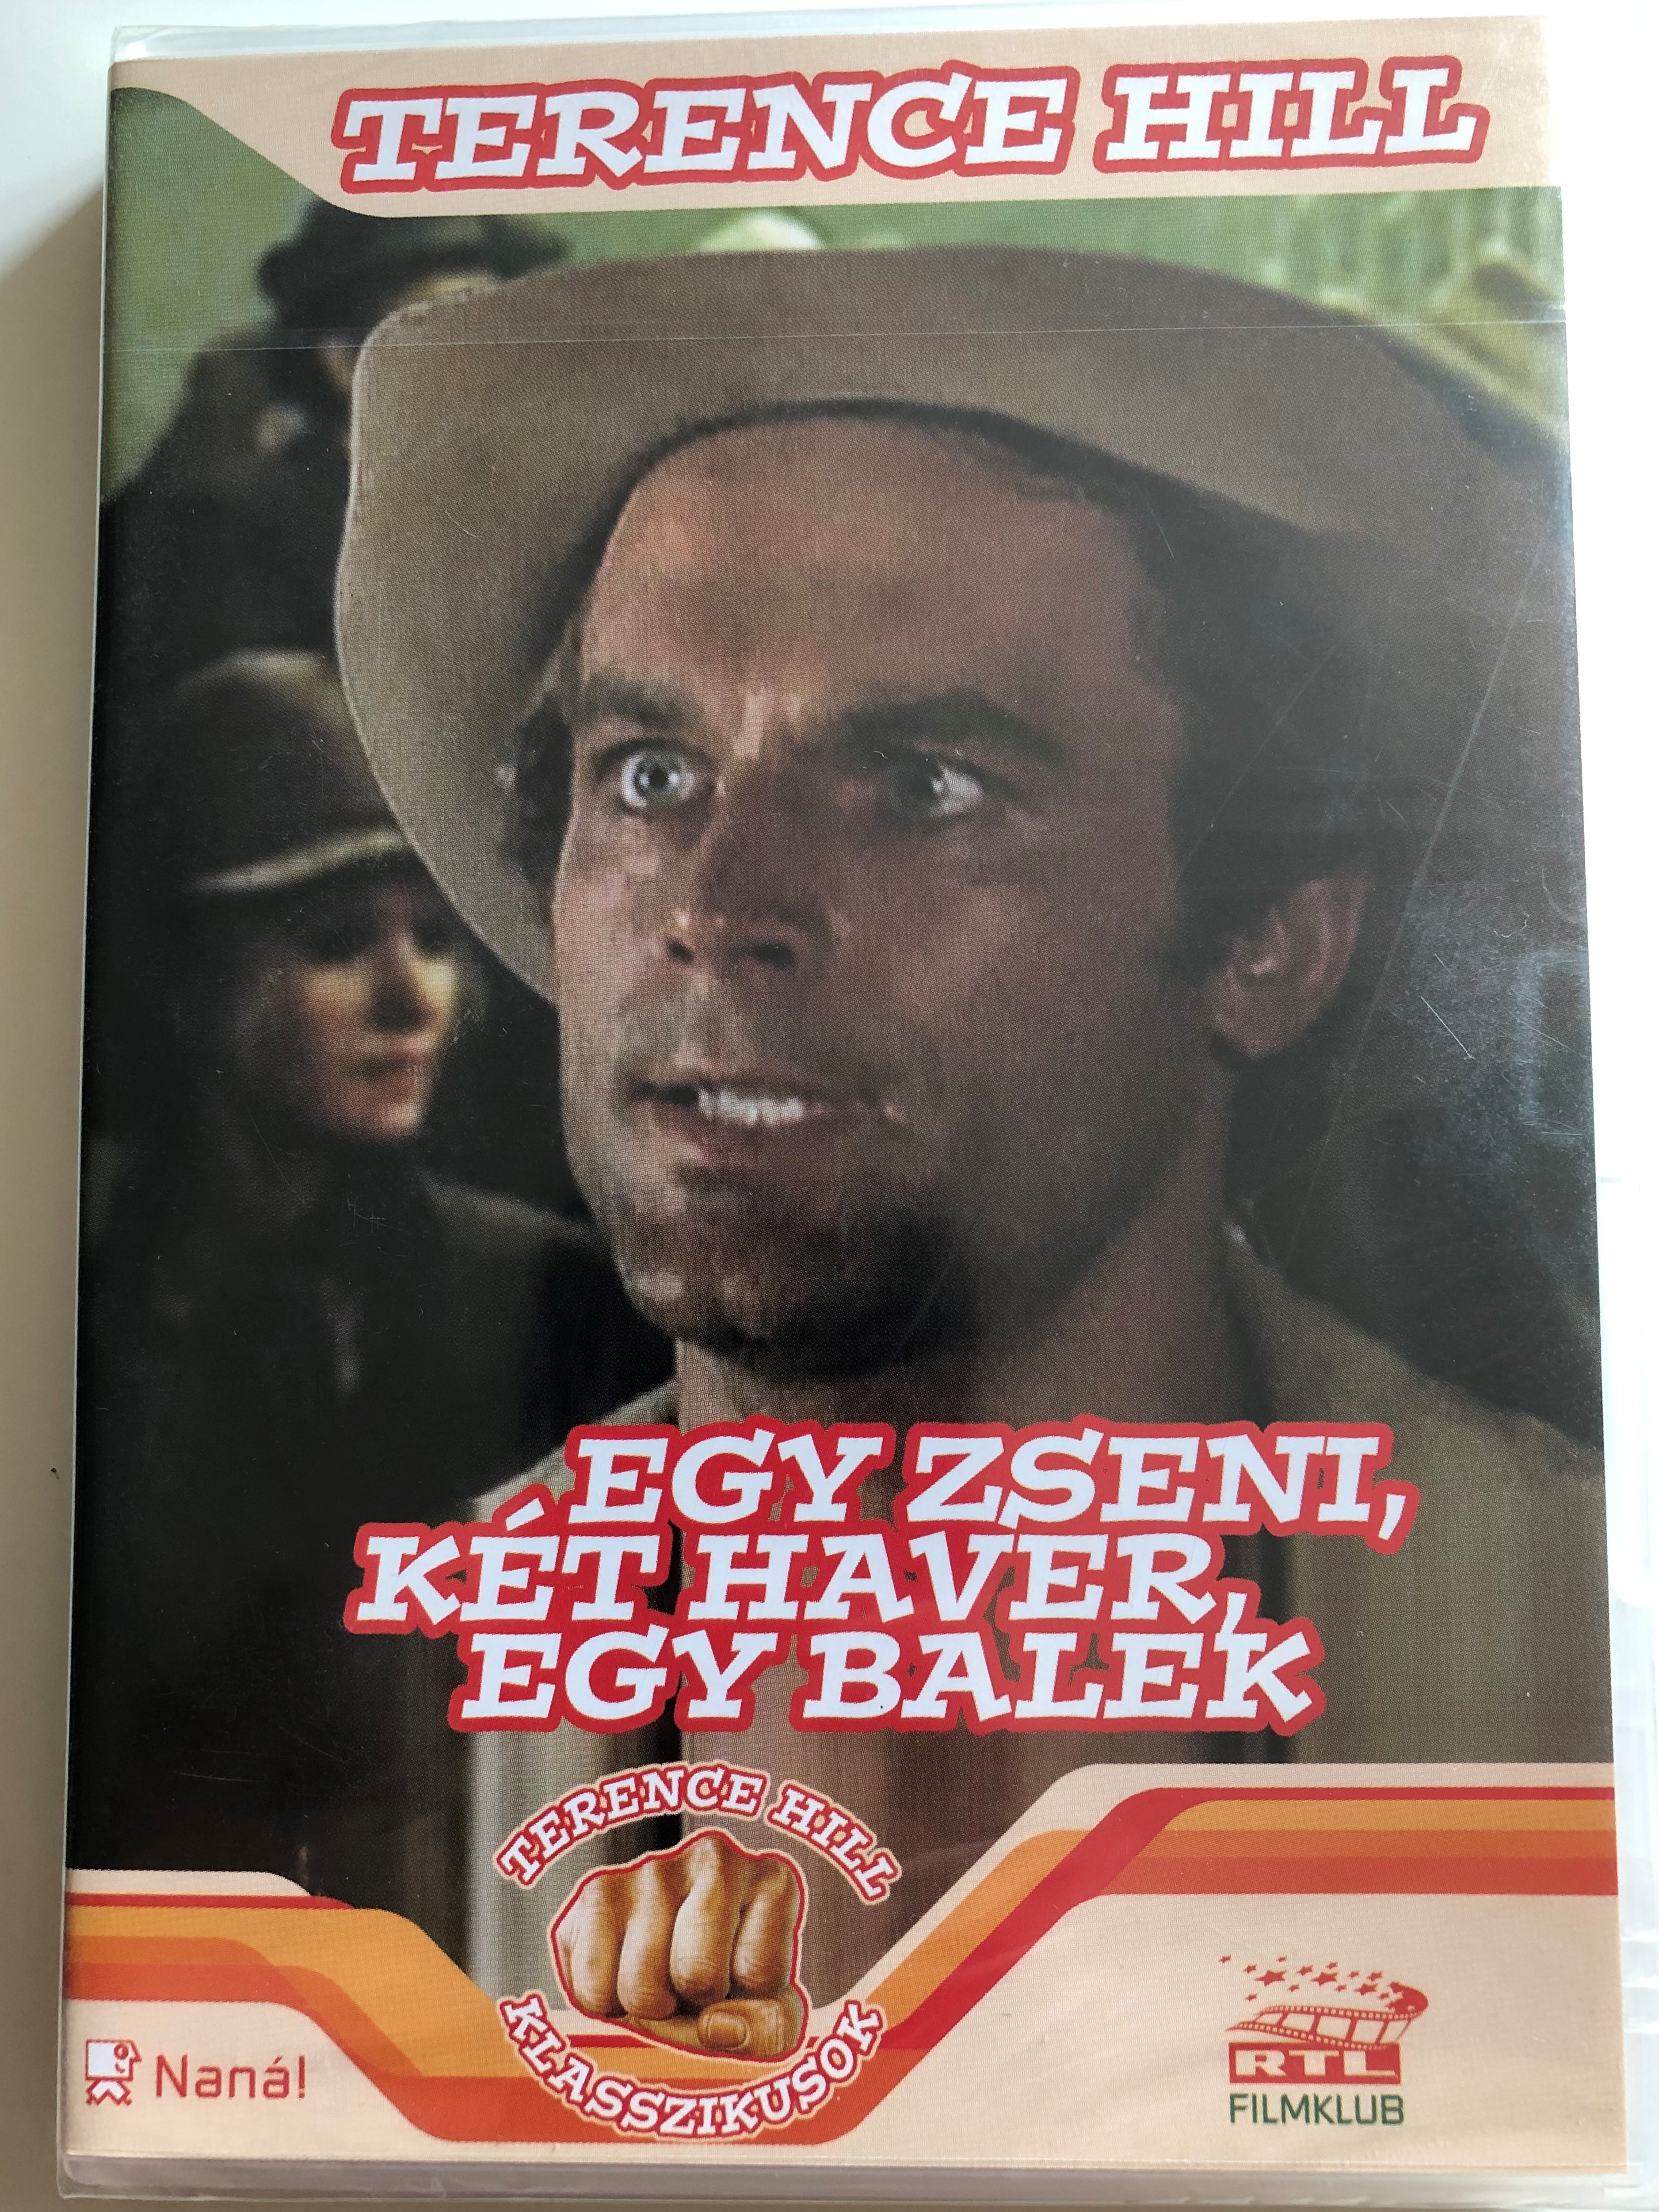 un-genio-due-compari-un-pollo-dvd-1975-egy-zseni-k-t-haver-egy-balek-a-genius-two-partners-and-a-dupe-terence-hill-classics-directed-by-damiano-damiani-sergio-leone-music-ennio-morricone-starring-terence-hill-miou-1-.jpg